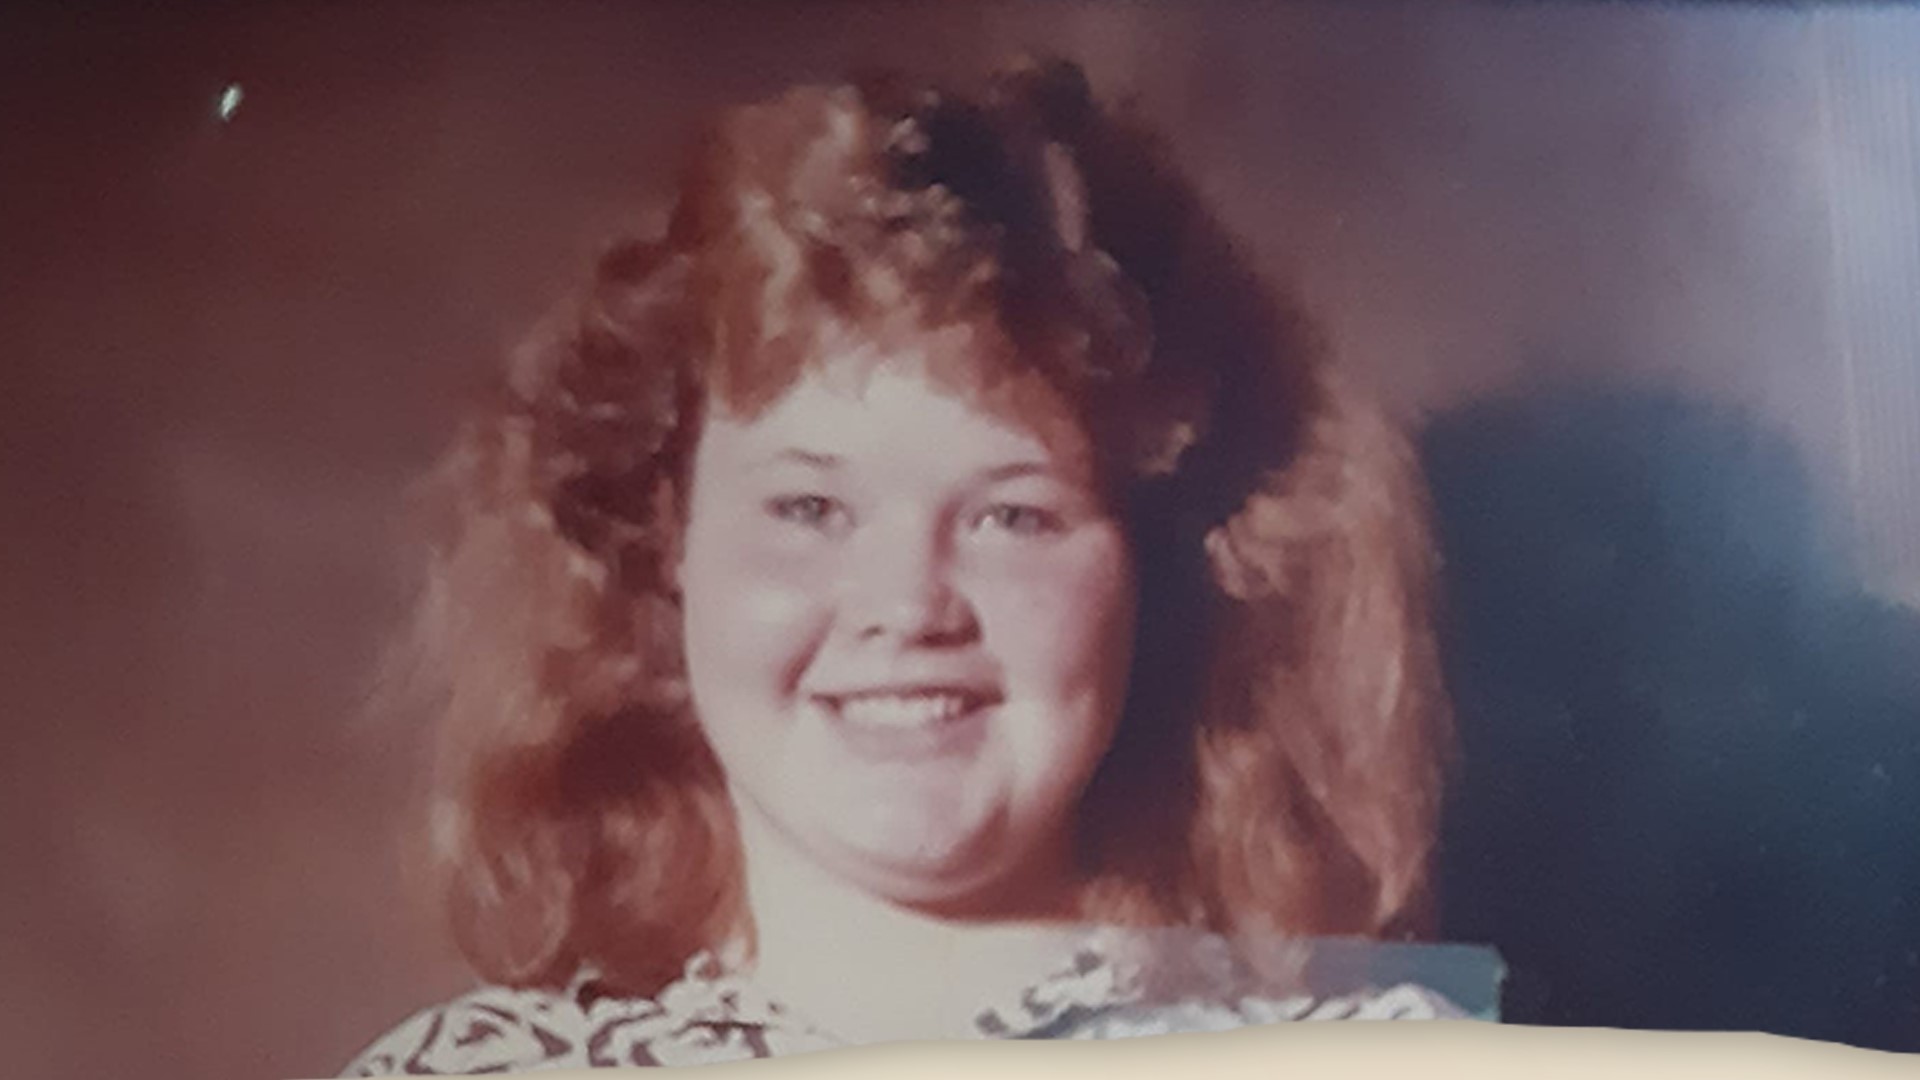 Thirty-five years ago, 14-year-old Brandy Dawn Hutchins was found murdered in an abandoned house in Johnson County. Questions surrounding her death still linger as t